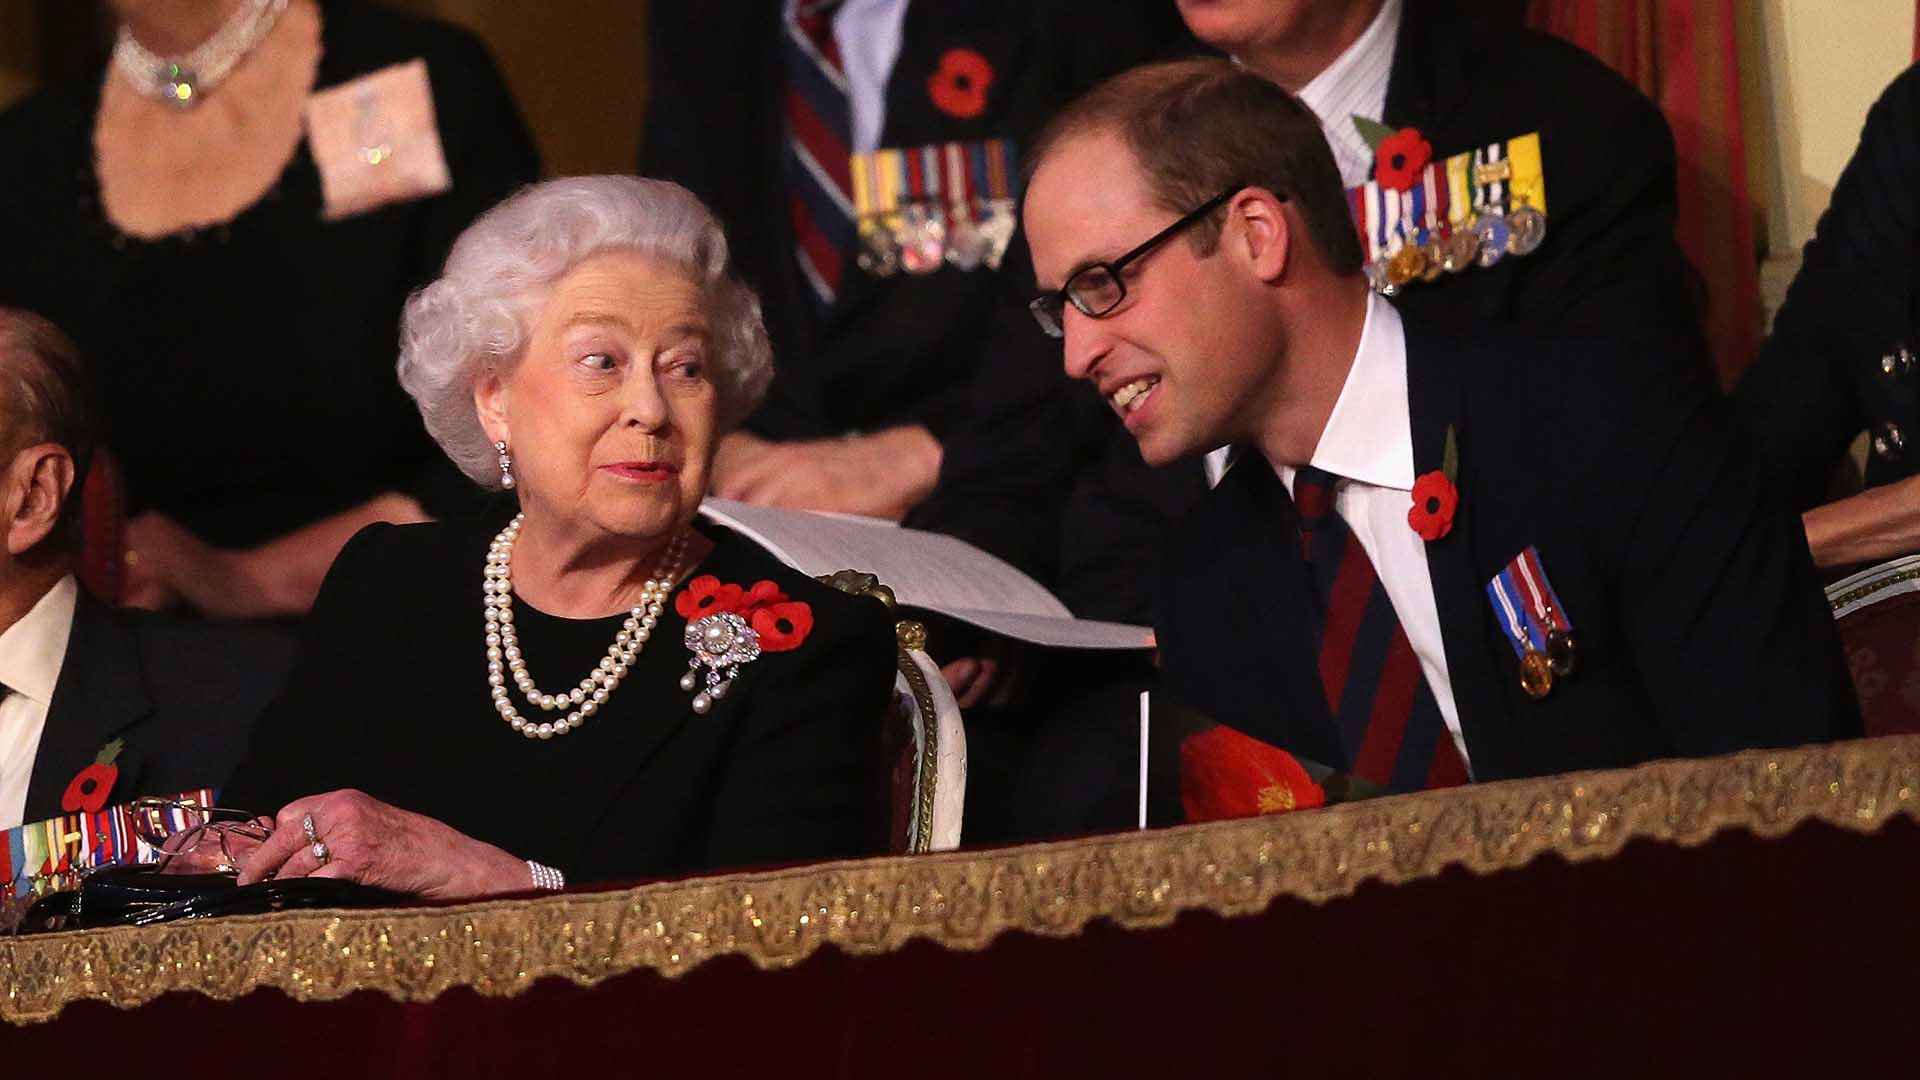 Queen Elizabeth II and Prince William, Duke of Cambridge at the annual Royal British Legion Festival of Remembrance in London